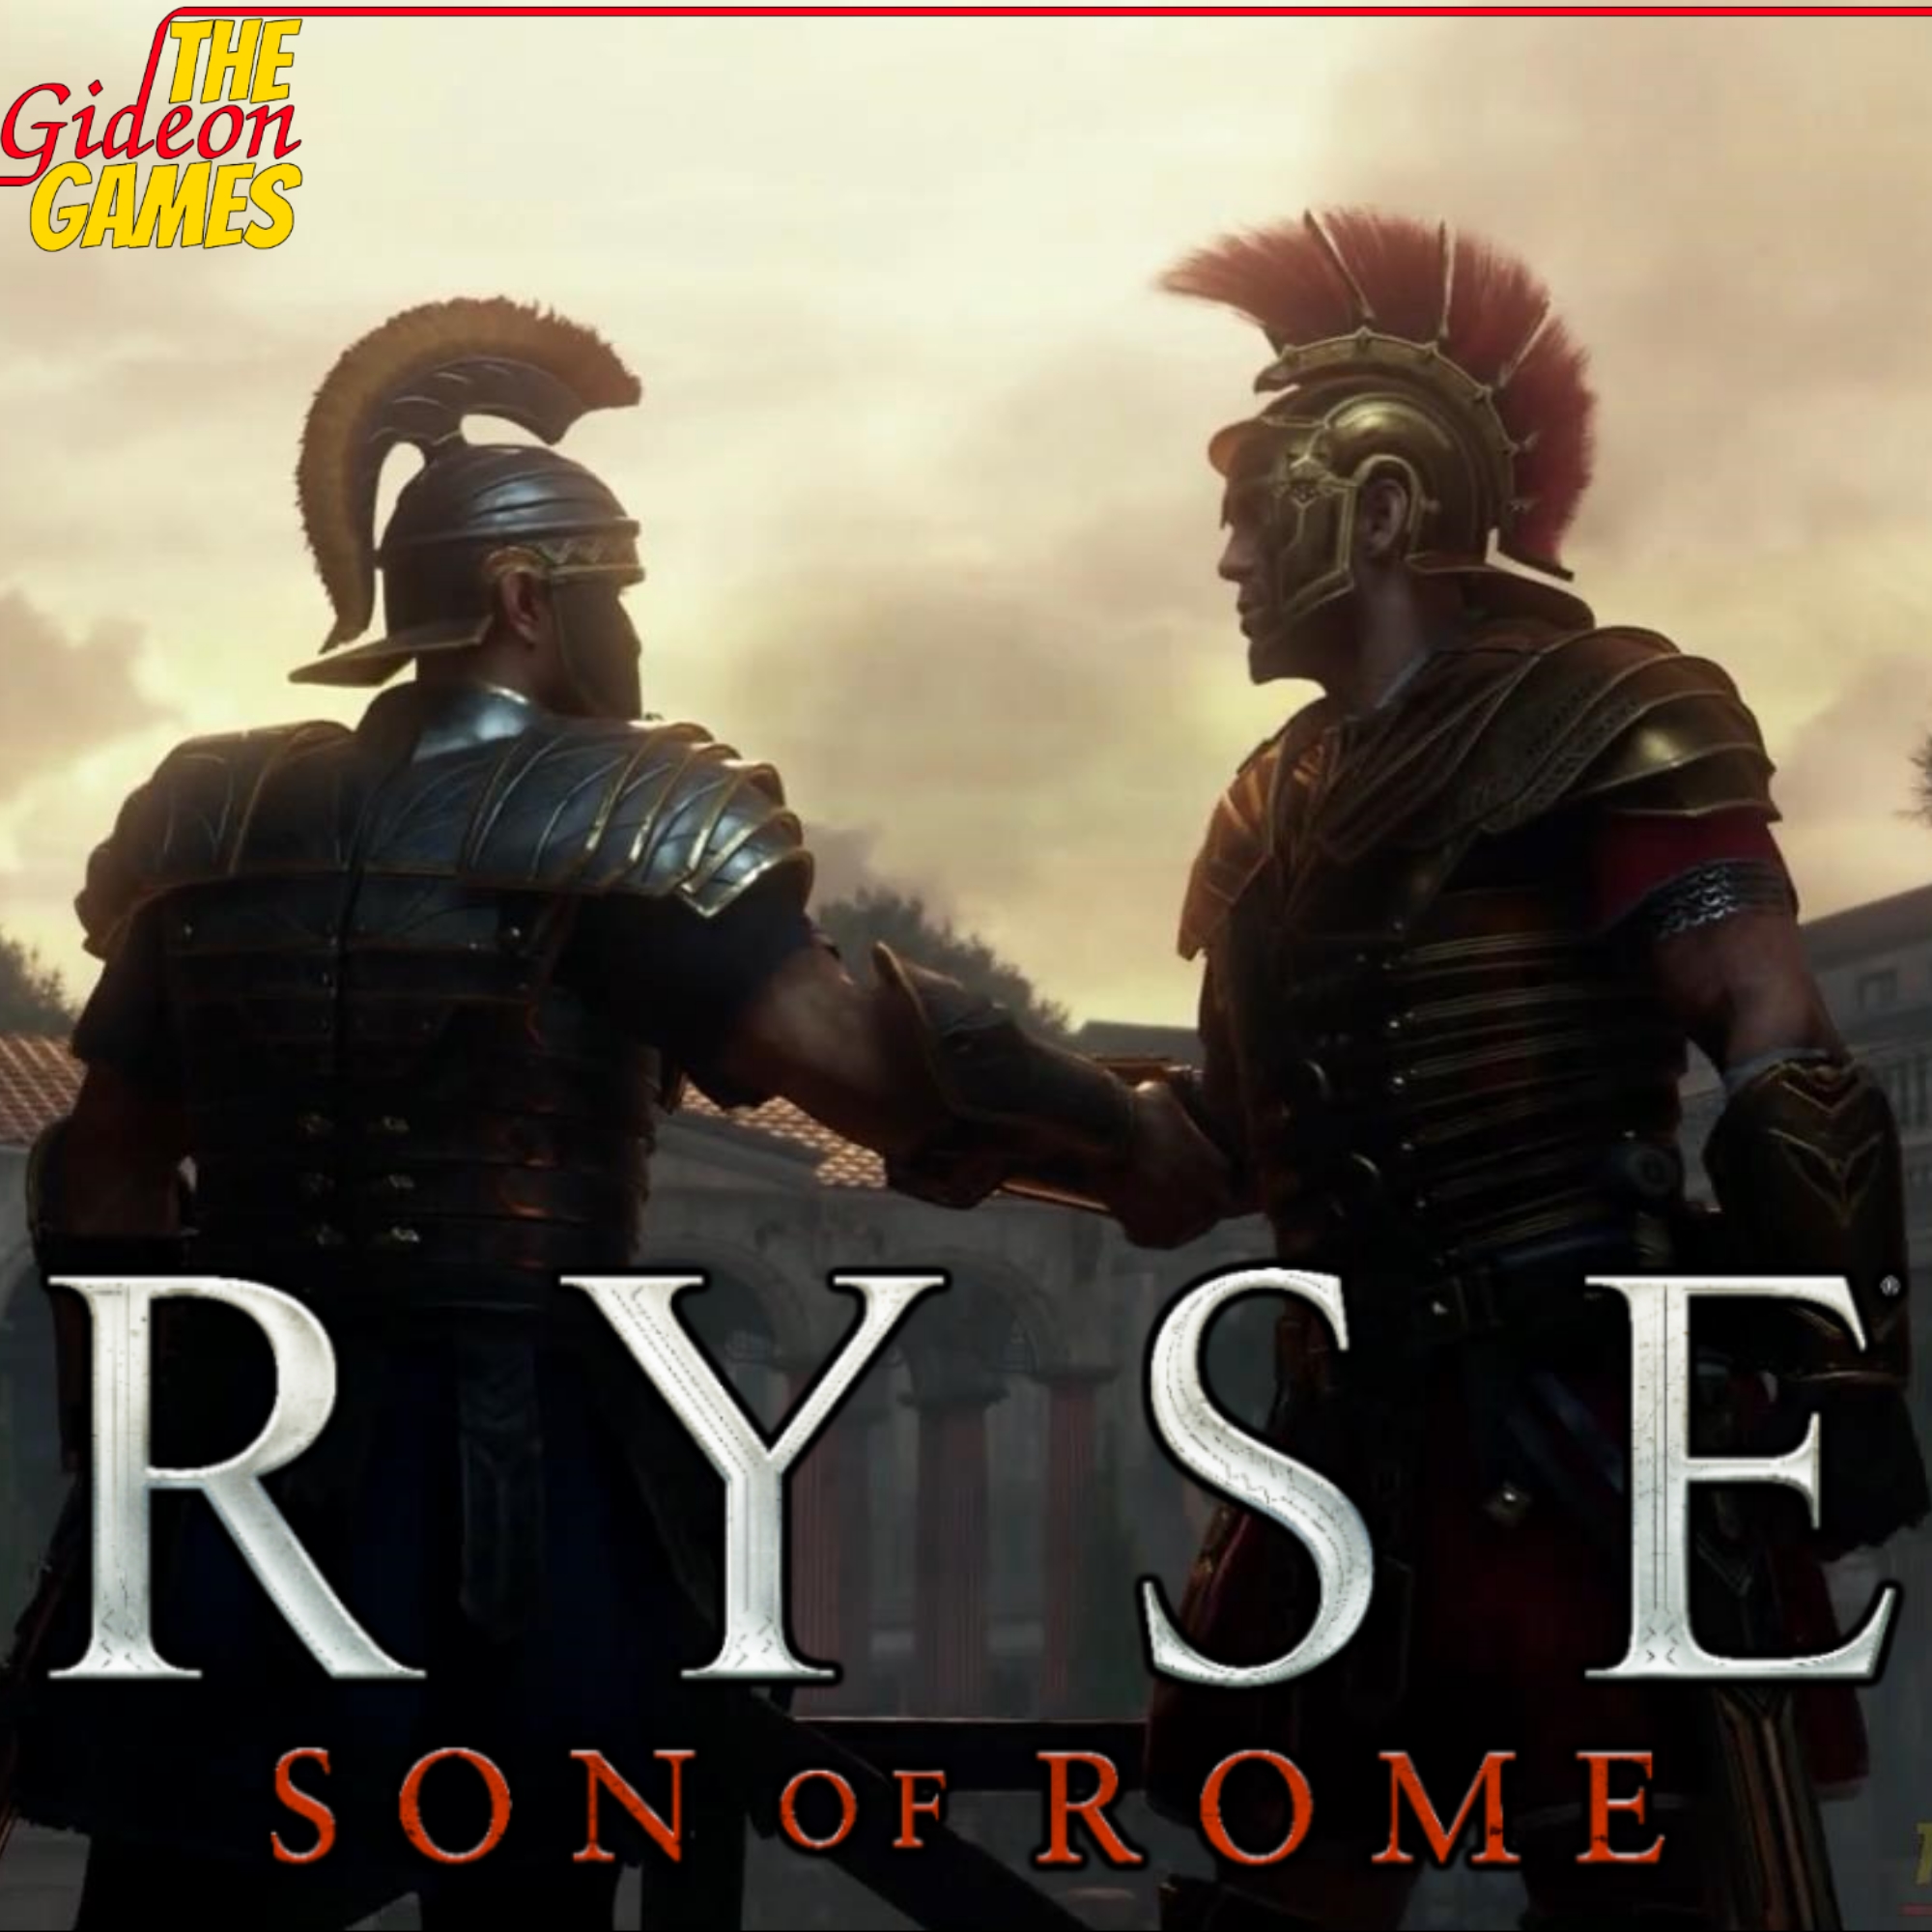 Ryse son of rome on steam фото 23